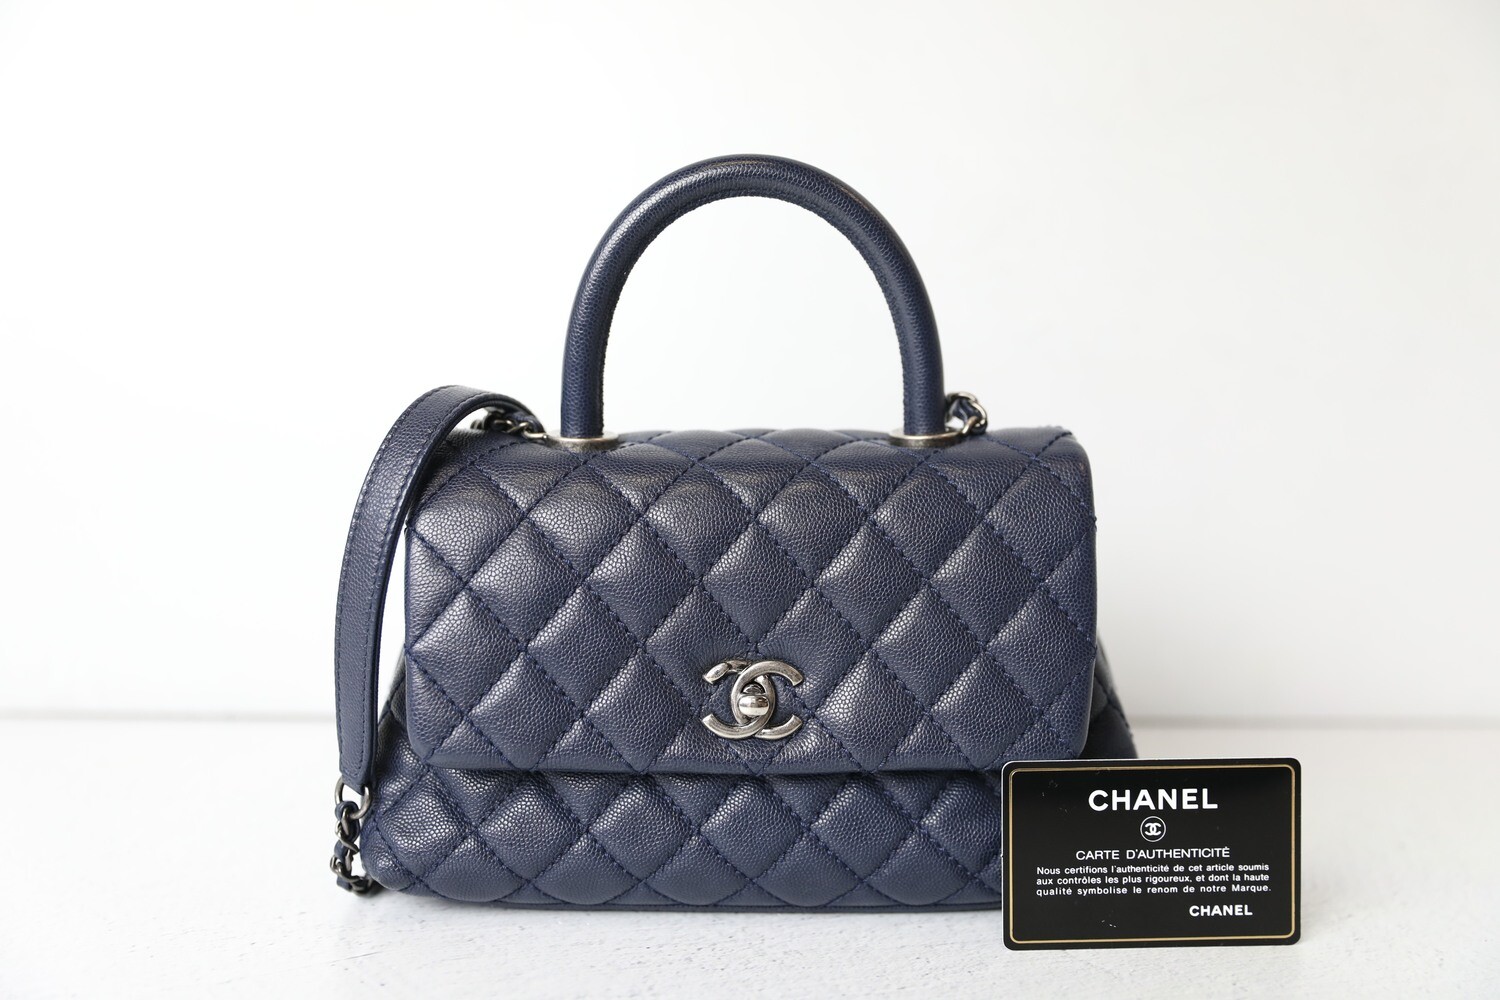 Chanel - Authenticated Coco Handle Handbag - Leather Blue Plain for Women, Very Good Condition